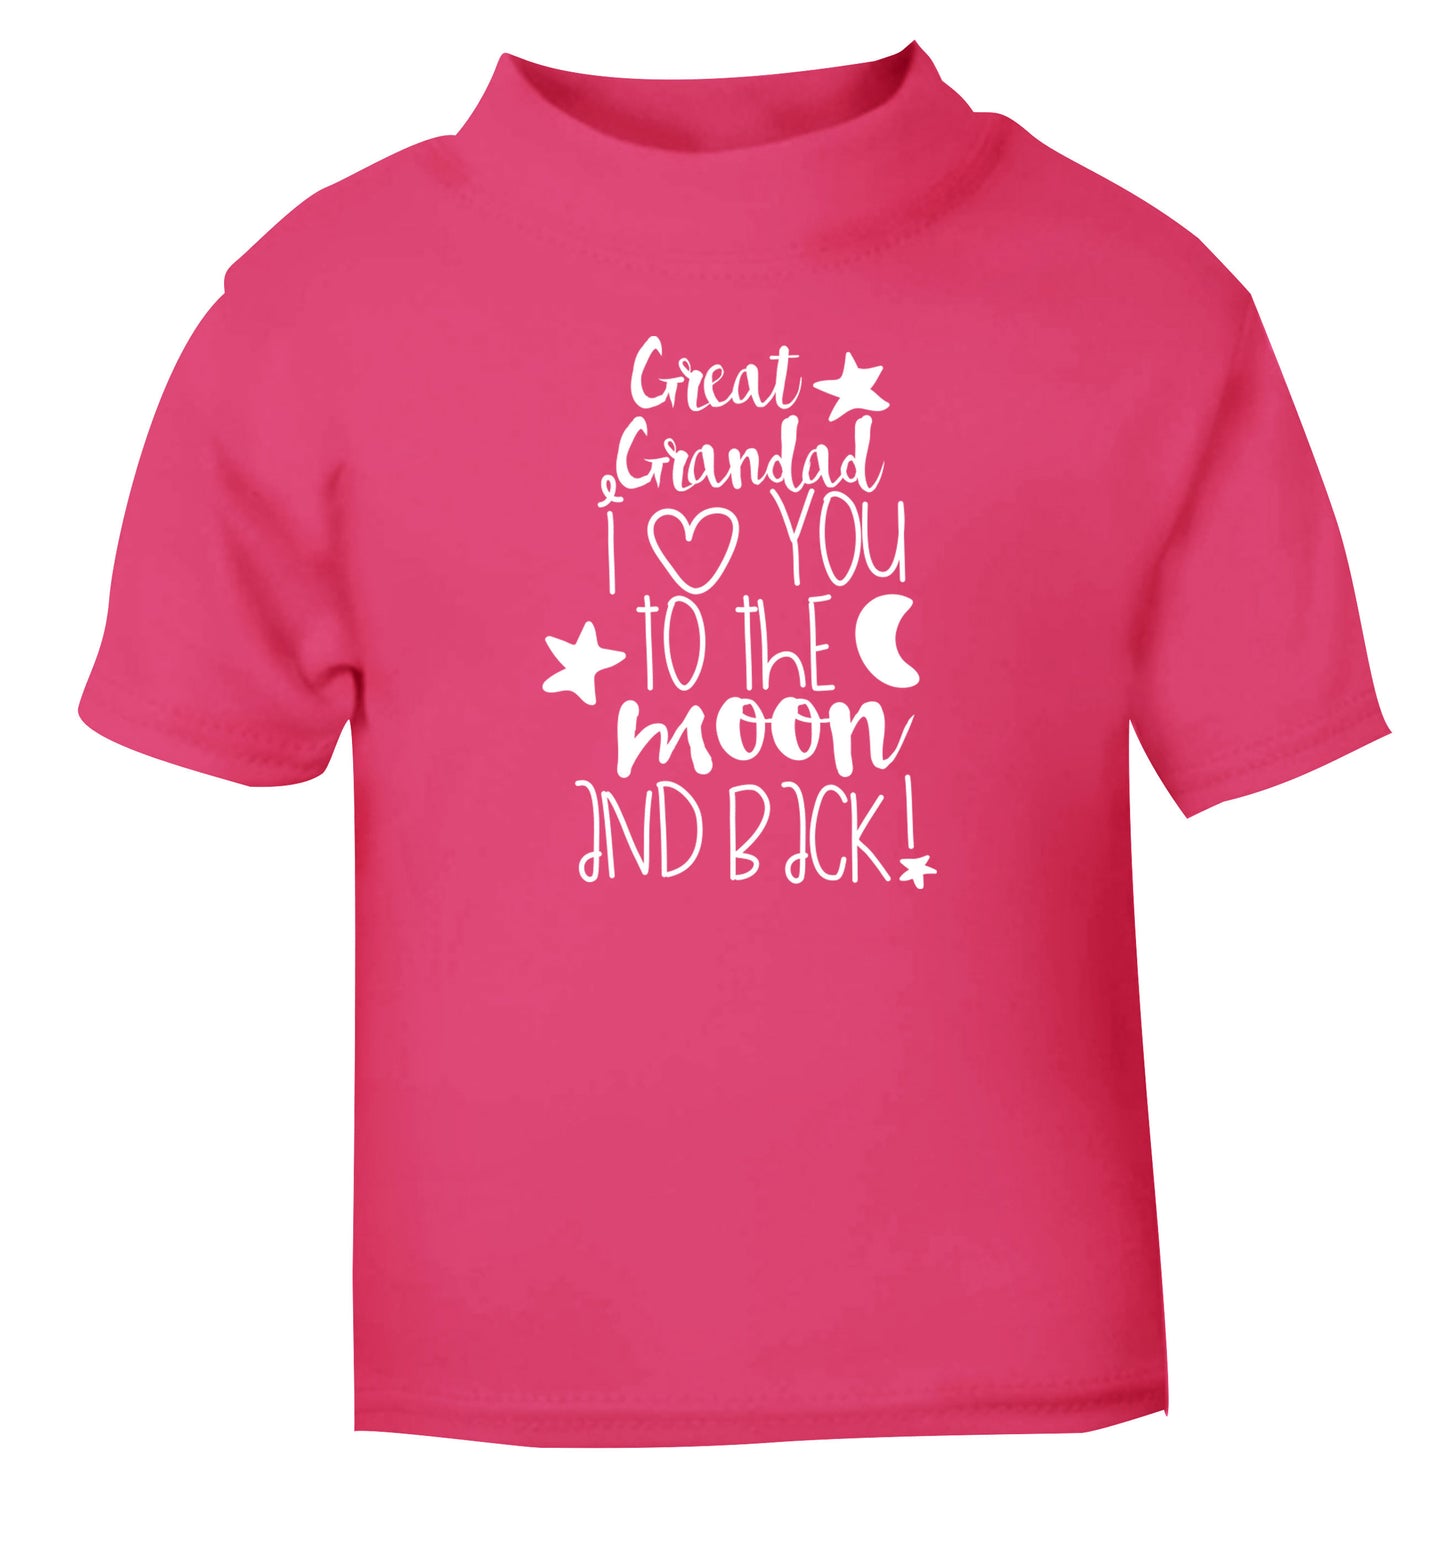 Great Grandad I love you to the moon and back pink Baby Toddler Tshirt 2 Years